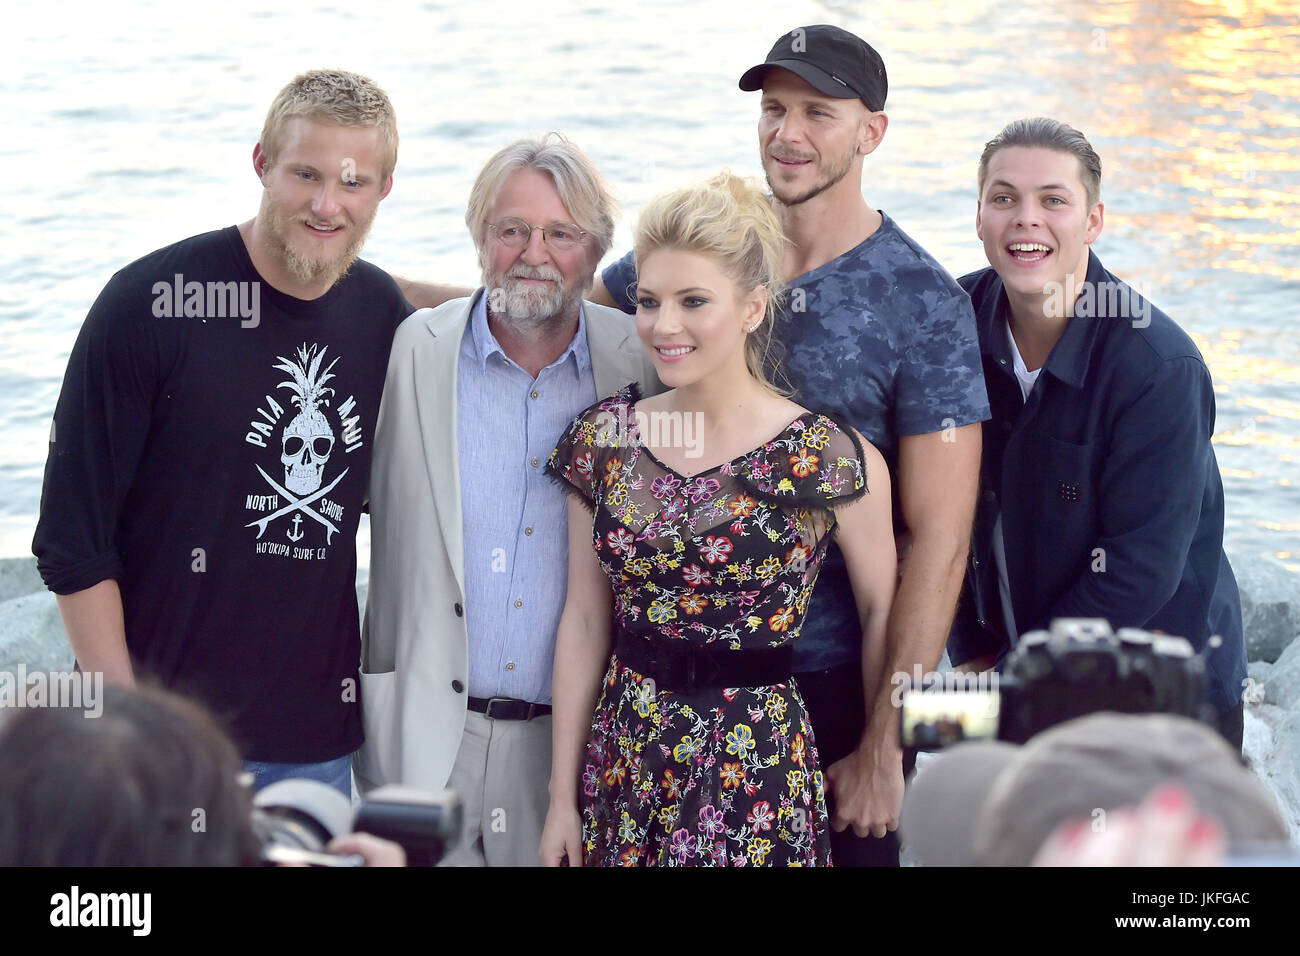 San Diego, California. 21st July, 2017. Alexander Ludwig, Michael Hirst, Katheryn Winnick, Gustaf Skarsgard and Alex Hogh Andersen of HISTORY'S 'Vikings' attend the Viking Funeral Ceremony at San Diego Comic Con 2017 on July 21, 2017 in San Diego, California. | usage worldwide Credit: dpa/Alamy Live News Stock Photo